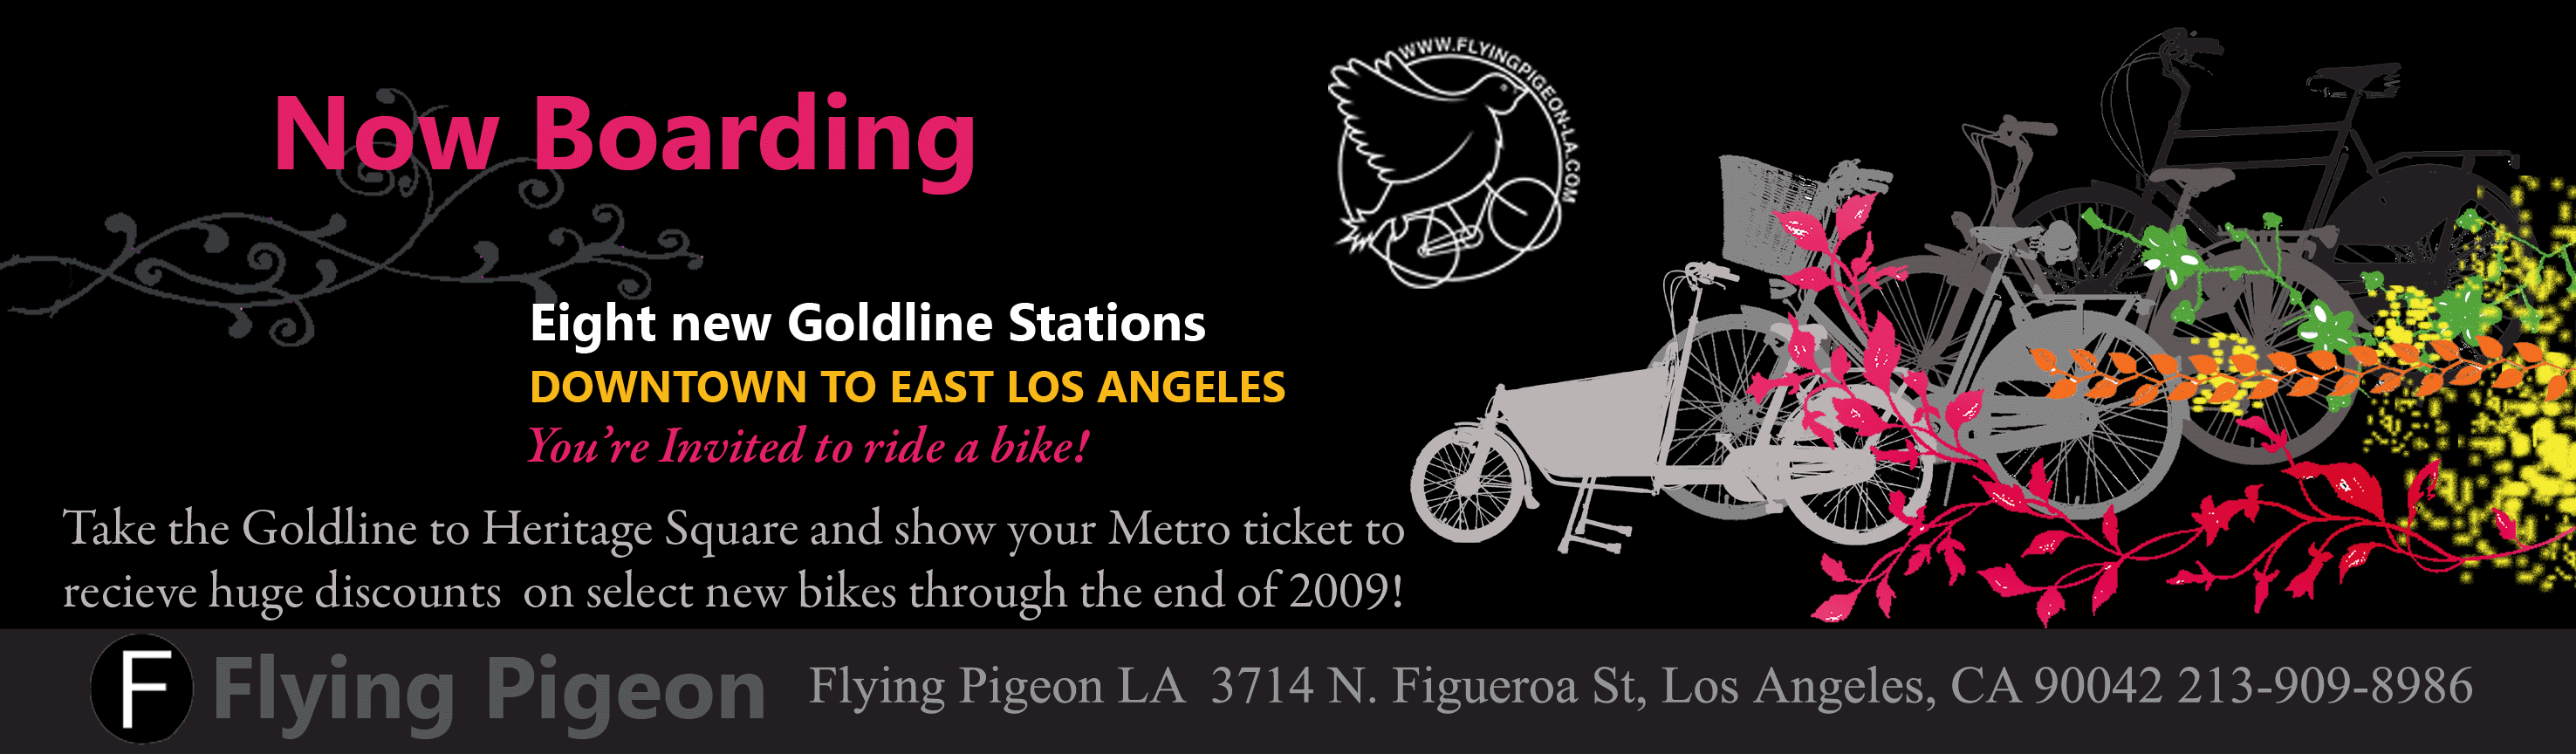 From now until the end of 2009, bring in a Metro pass to save big on bikes at Flying Pigeon LA.